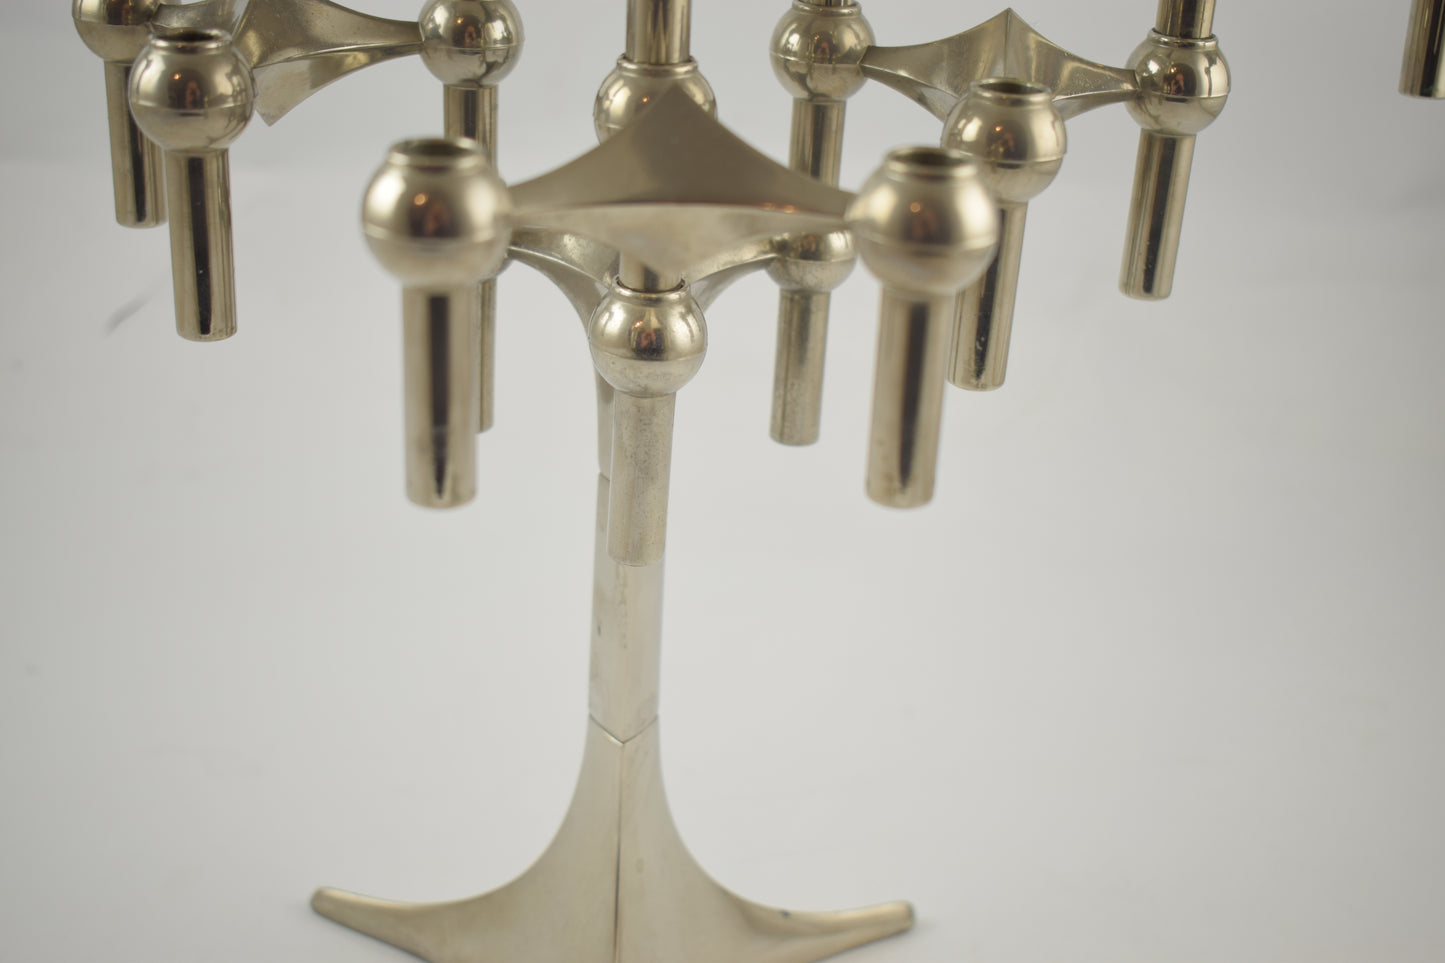 rare base Nagel Candle holders S22 designed by Ceasar Stoffi and Fritz Nagel and manufactured by BMF